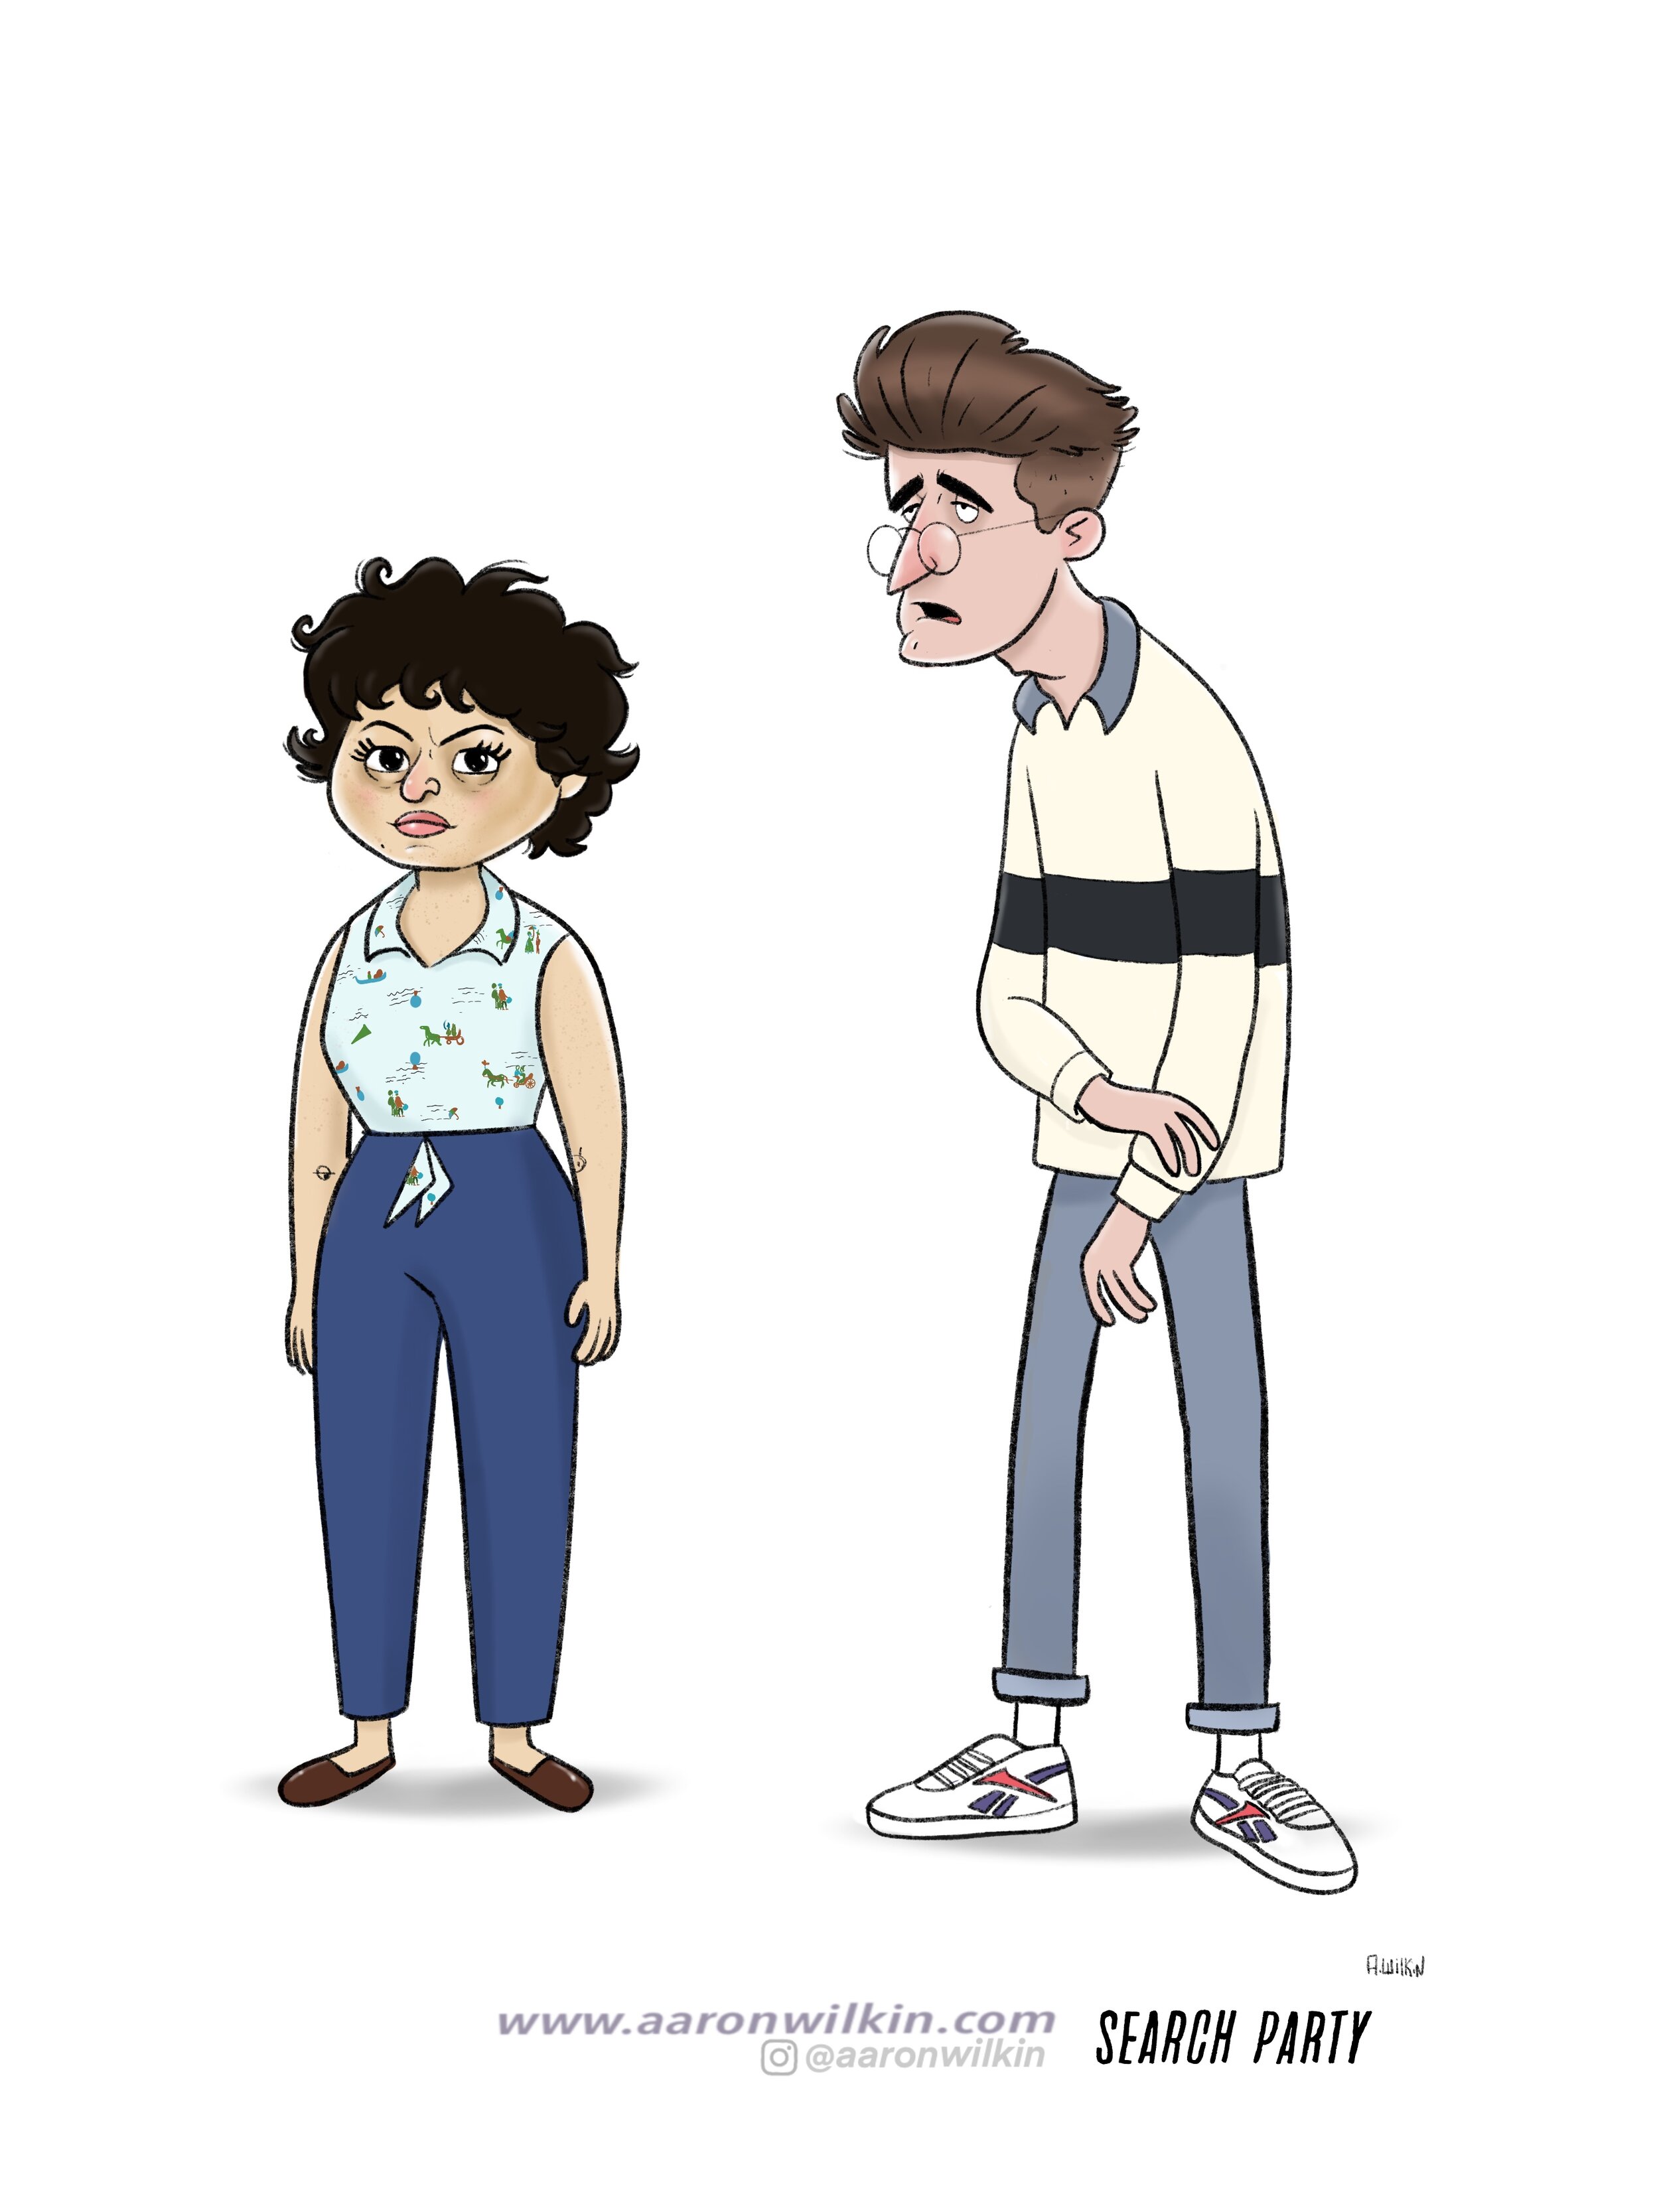 Search Party Character Design